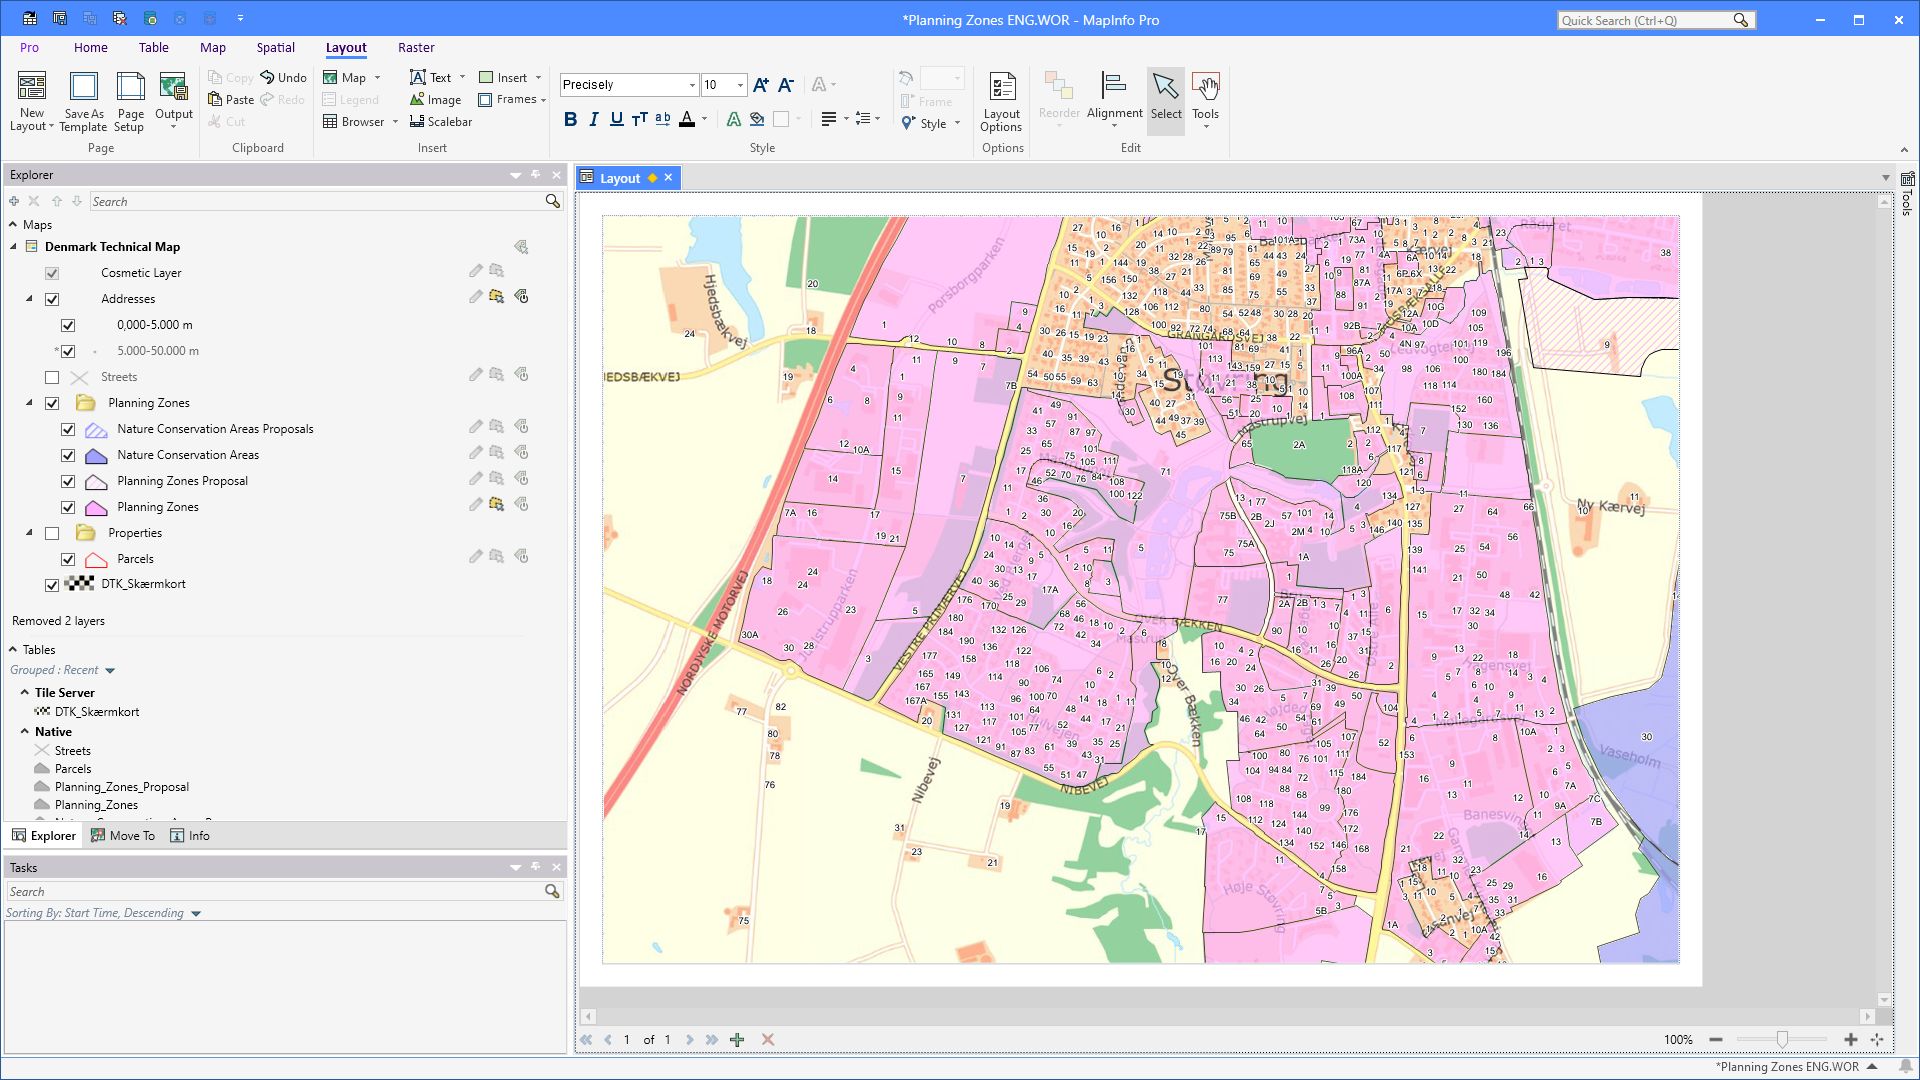 this image shows Interactive Maps to PDF Documents